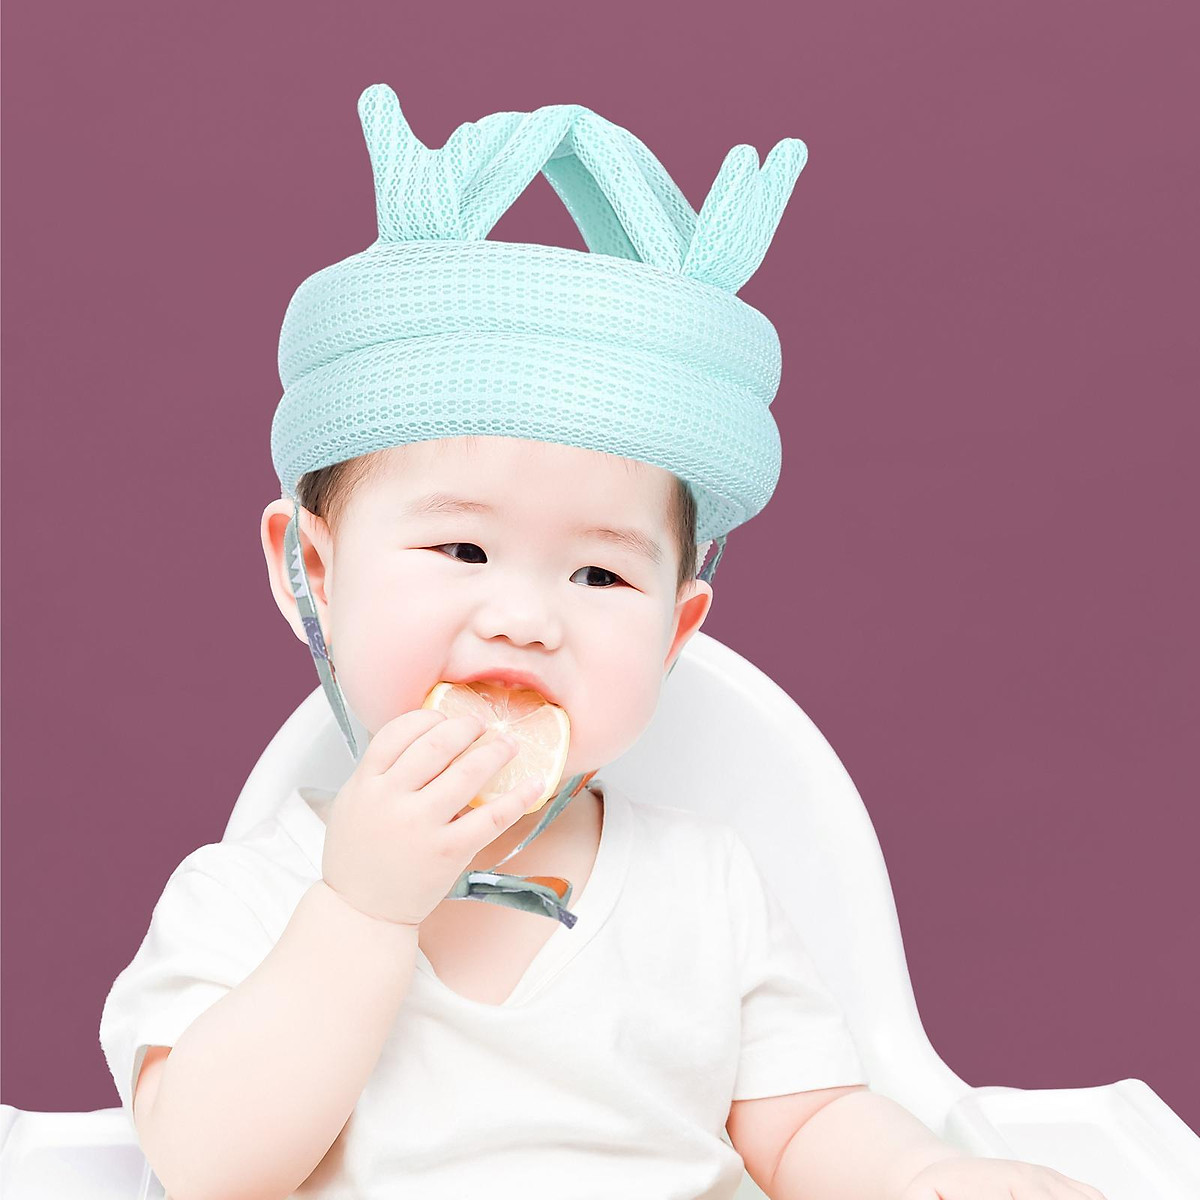 Baby Protective Head Protector Protection for Kids Children - Phụ ...